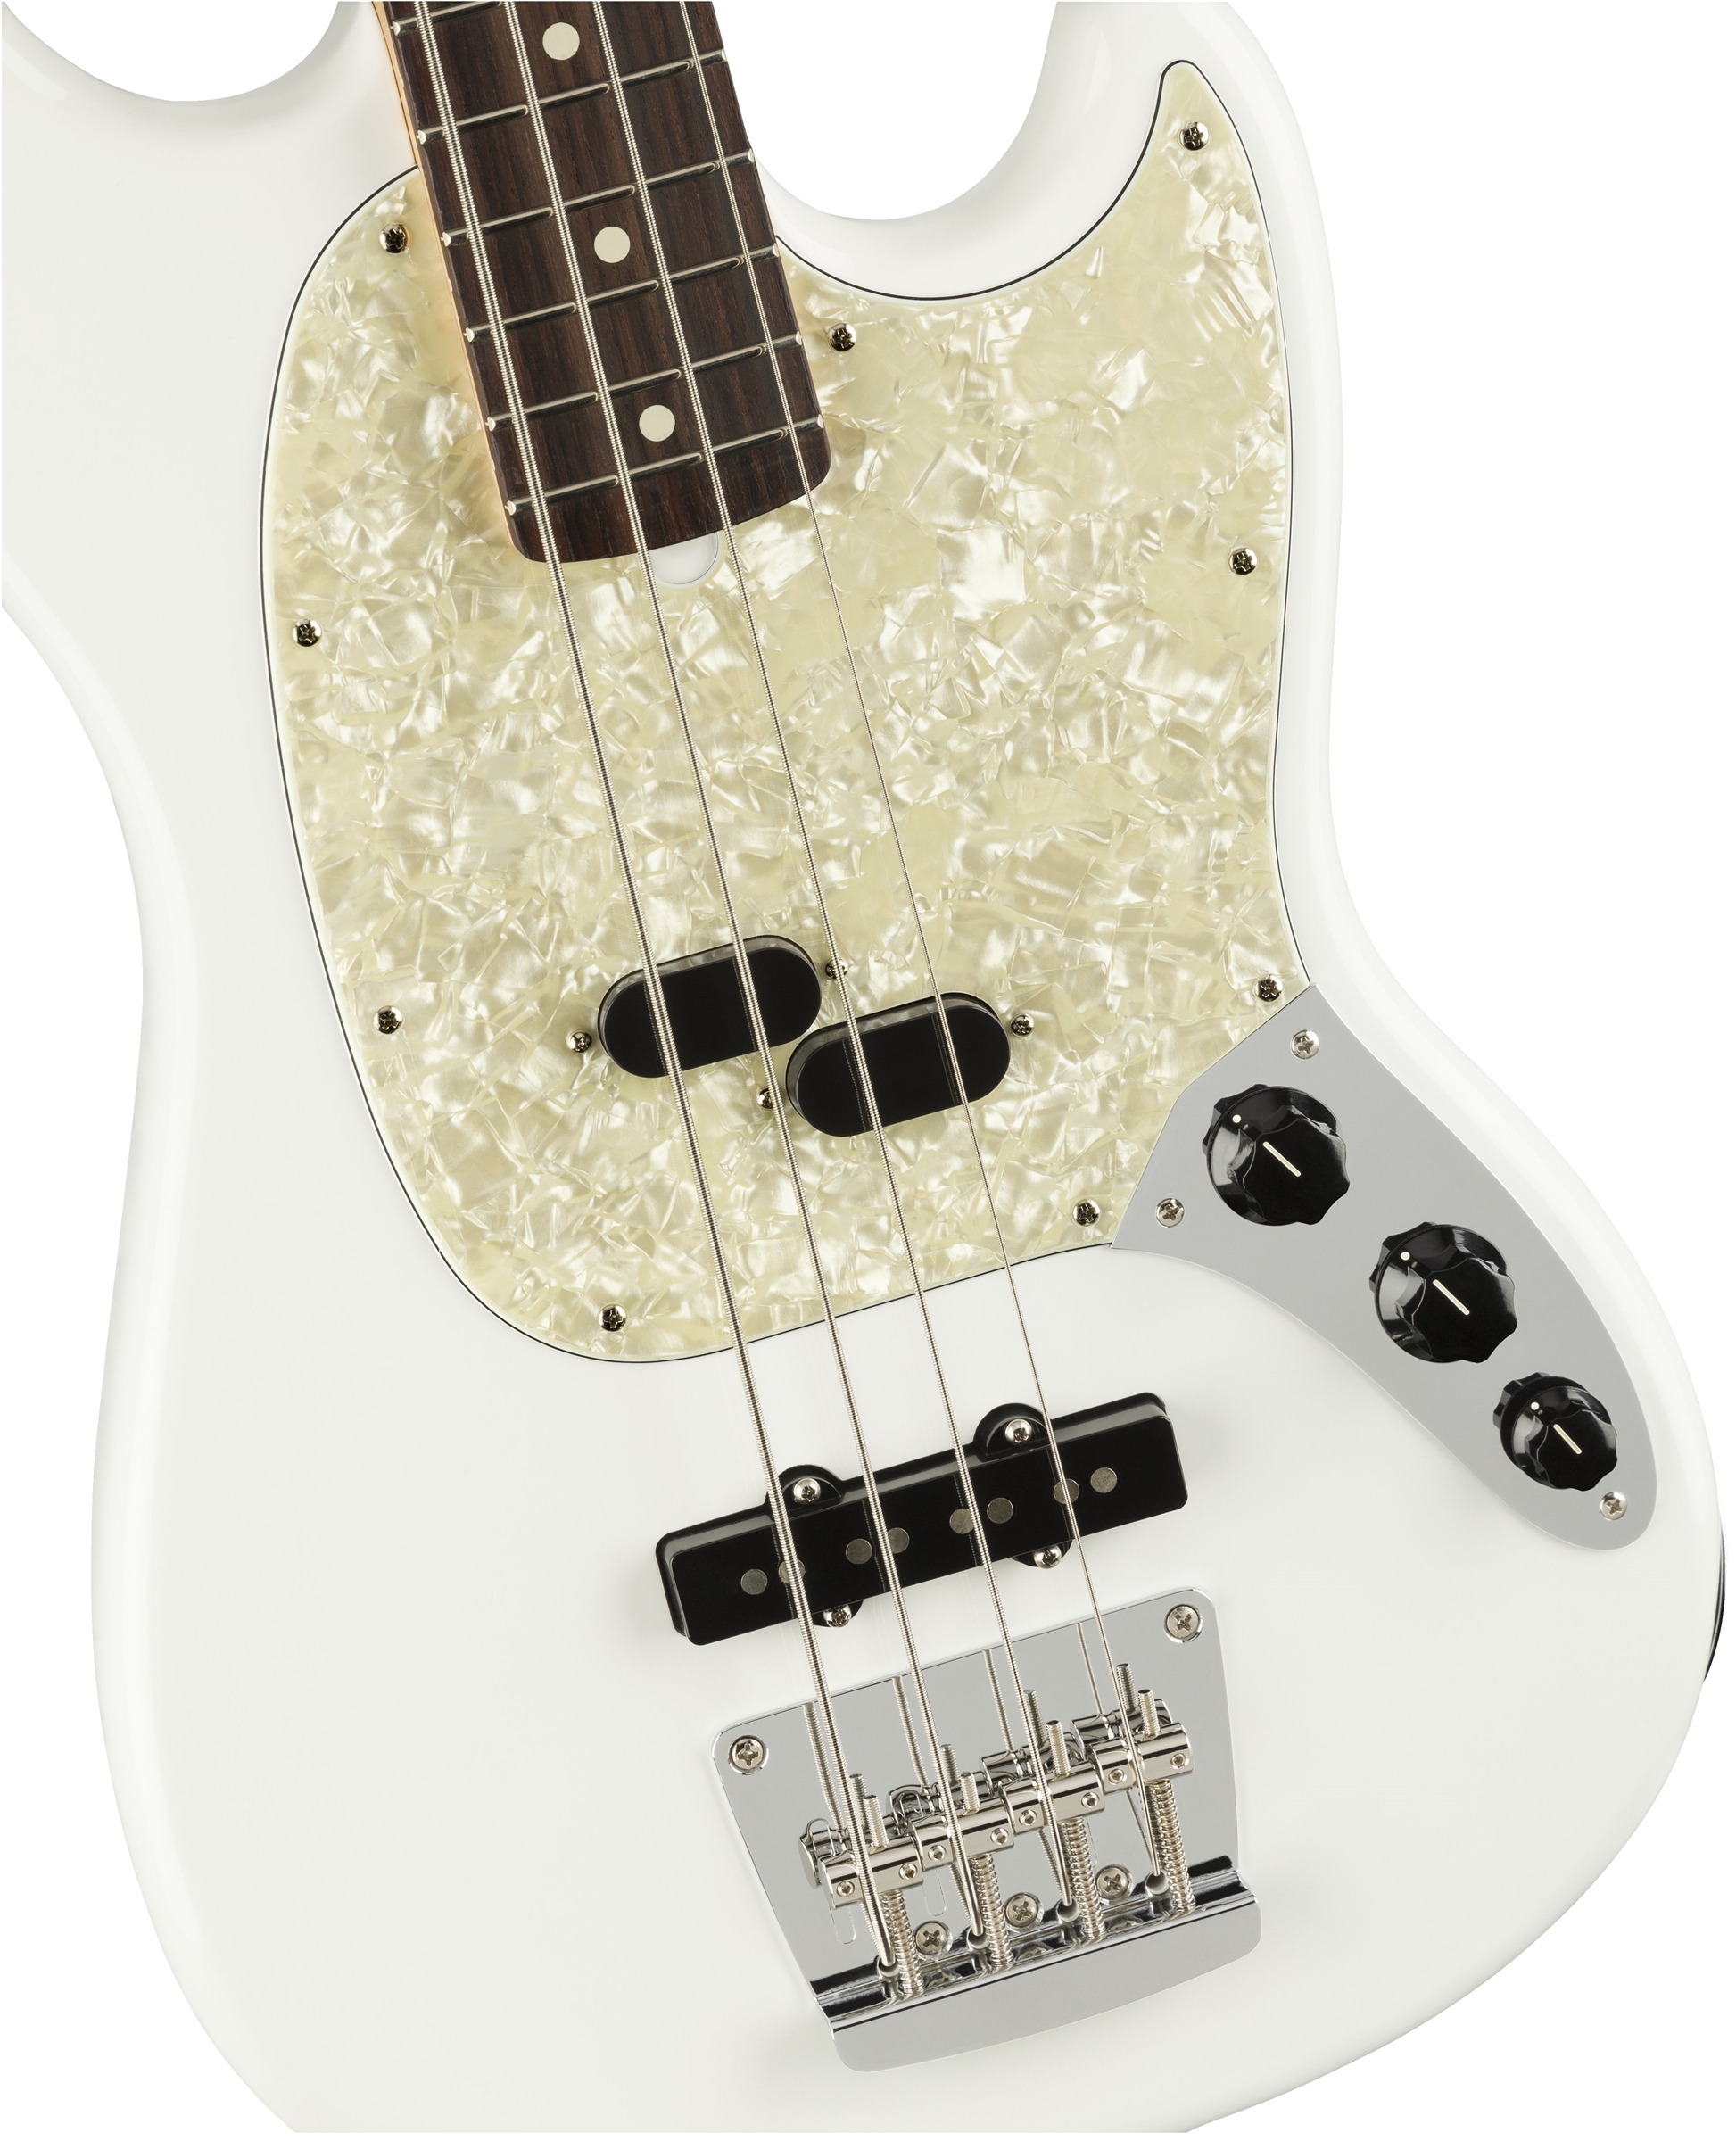 Fender Mustang Bass American Performer Usa Rw - Arctic White - Electric bass for kids - Variation 1